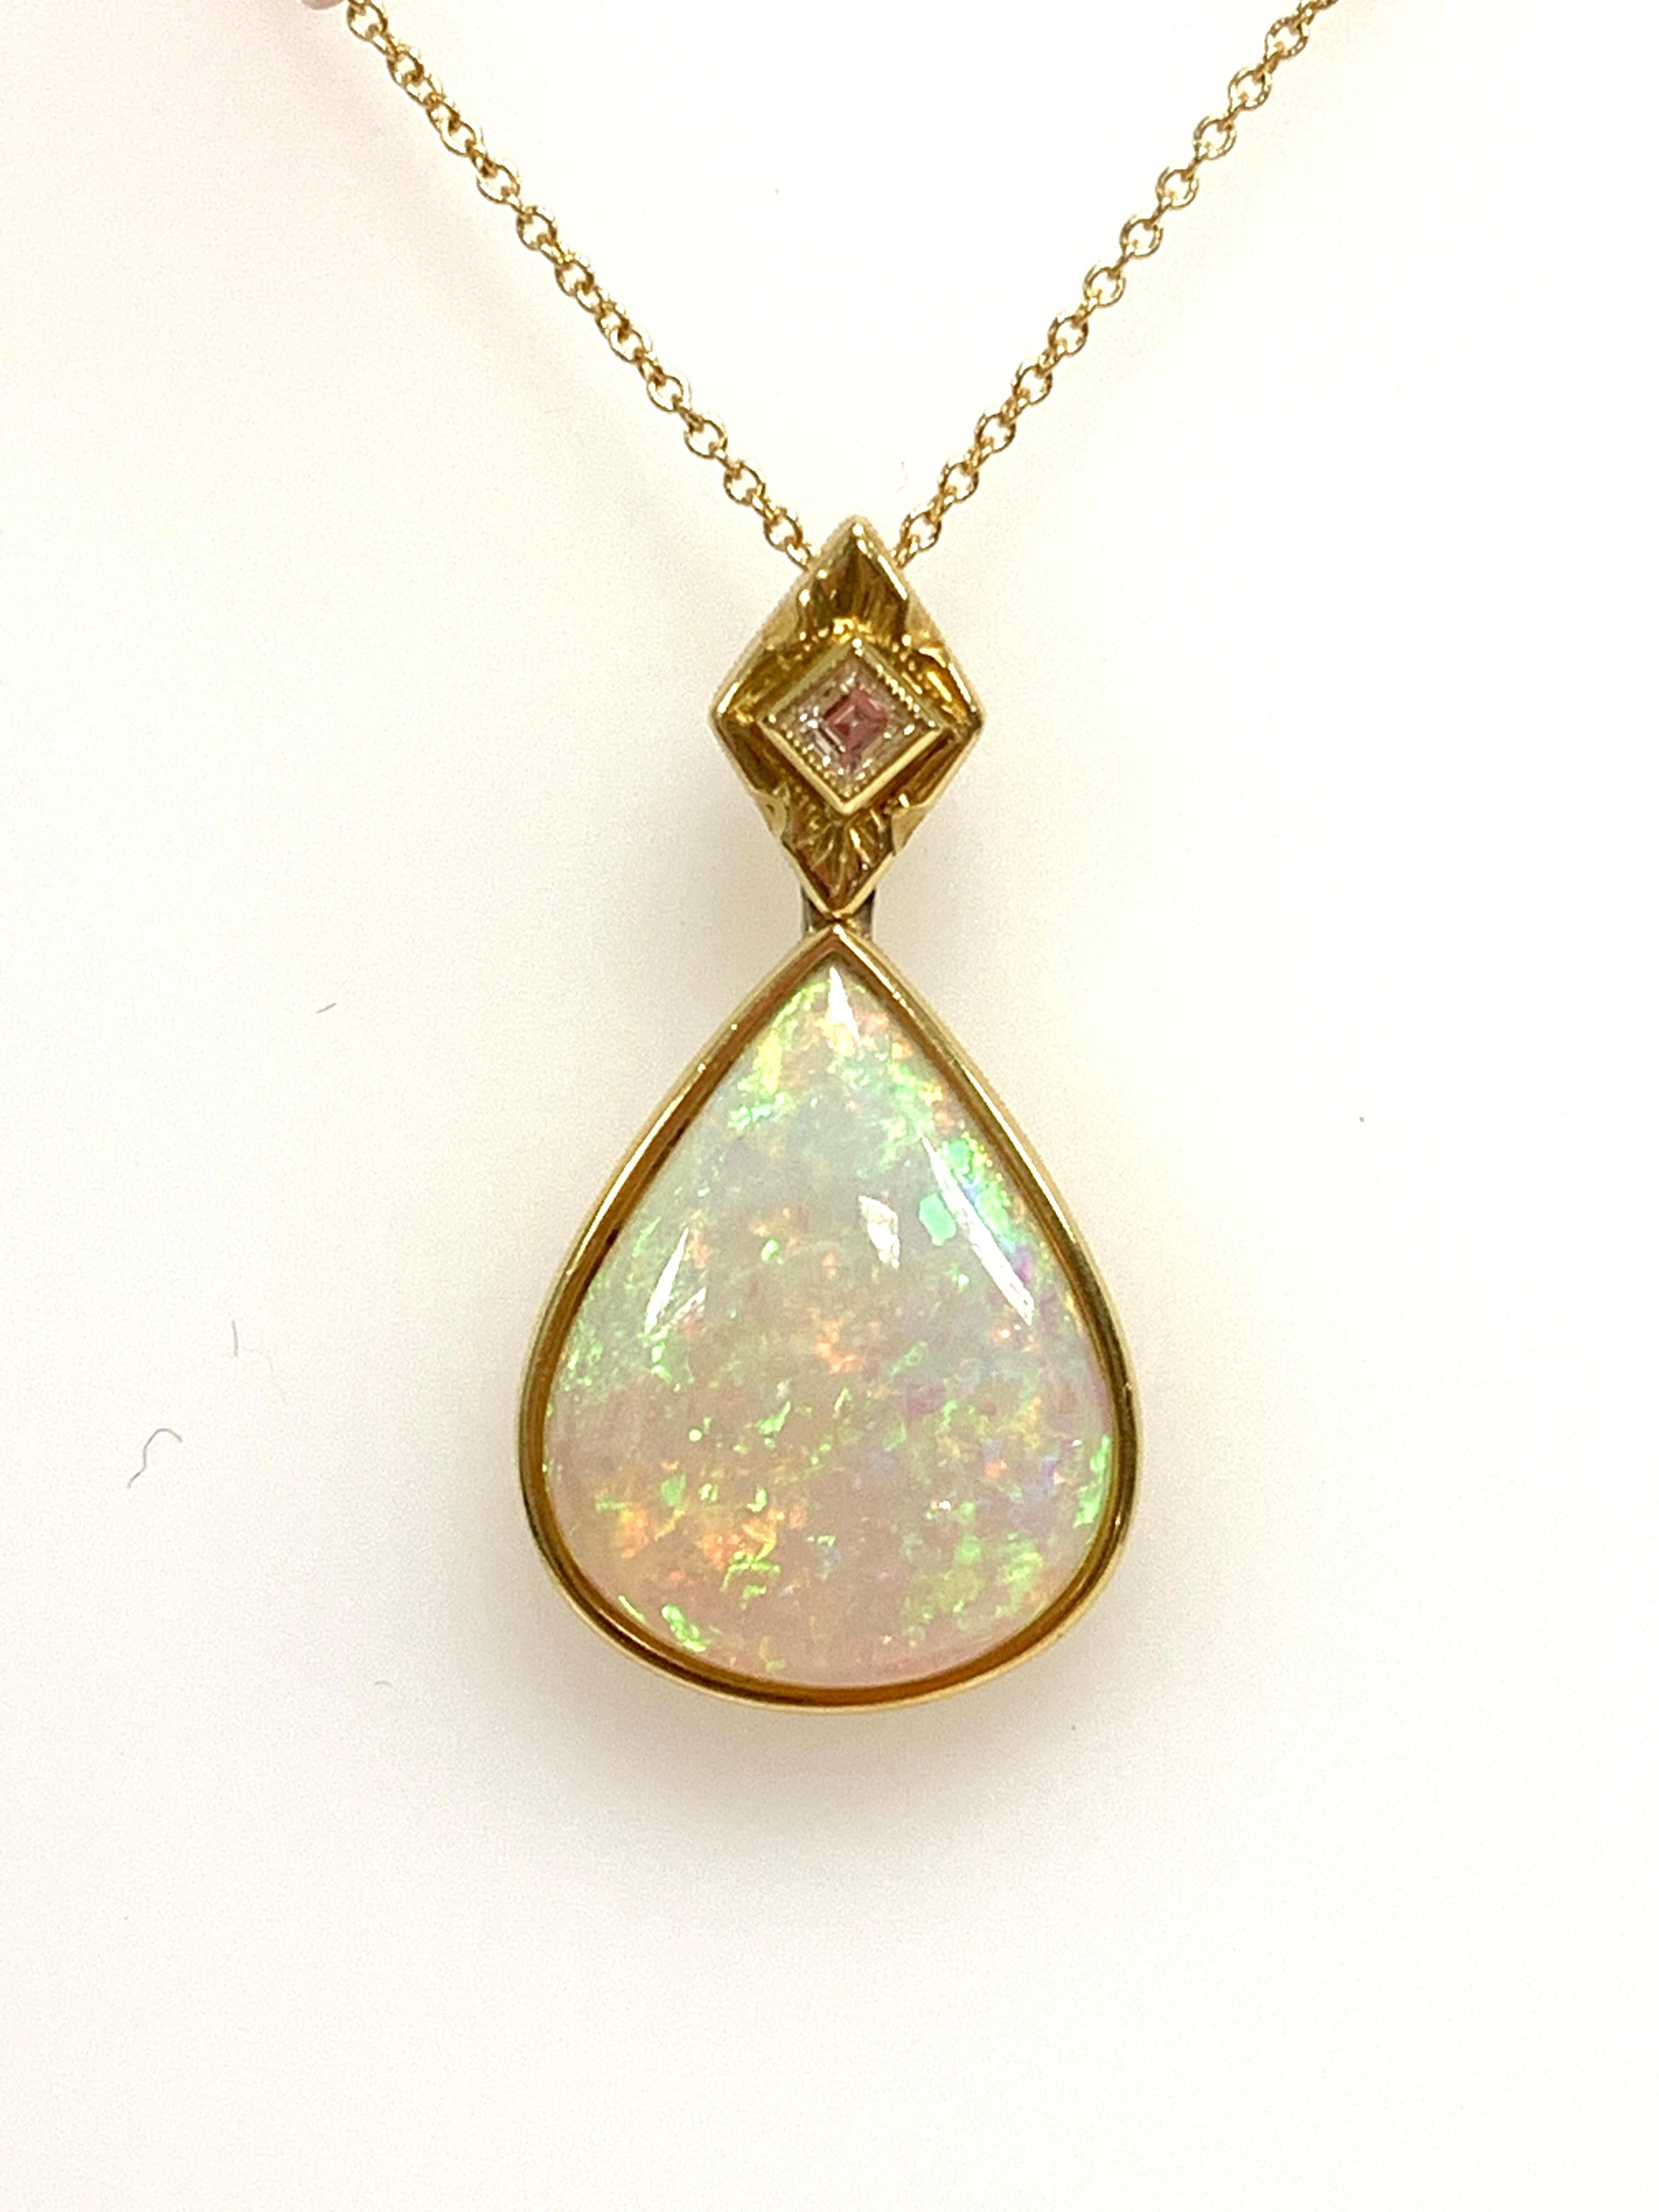 This pear-shaped opal pendant is a natural kaleidoscope of color! The multicolored 